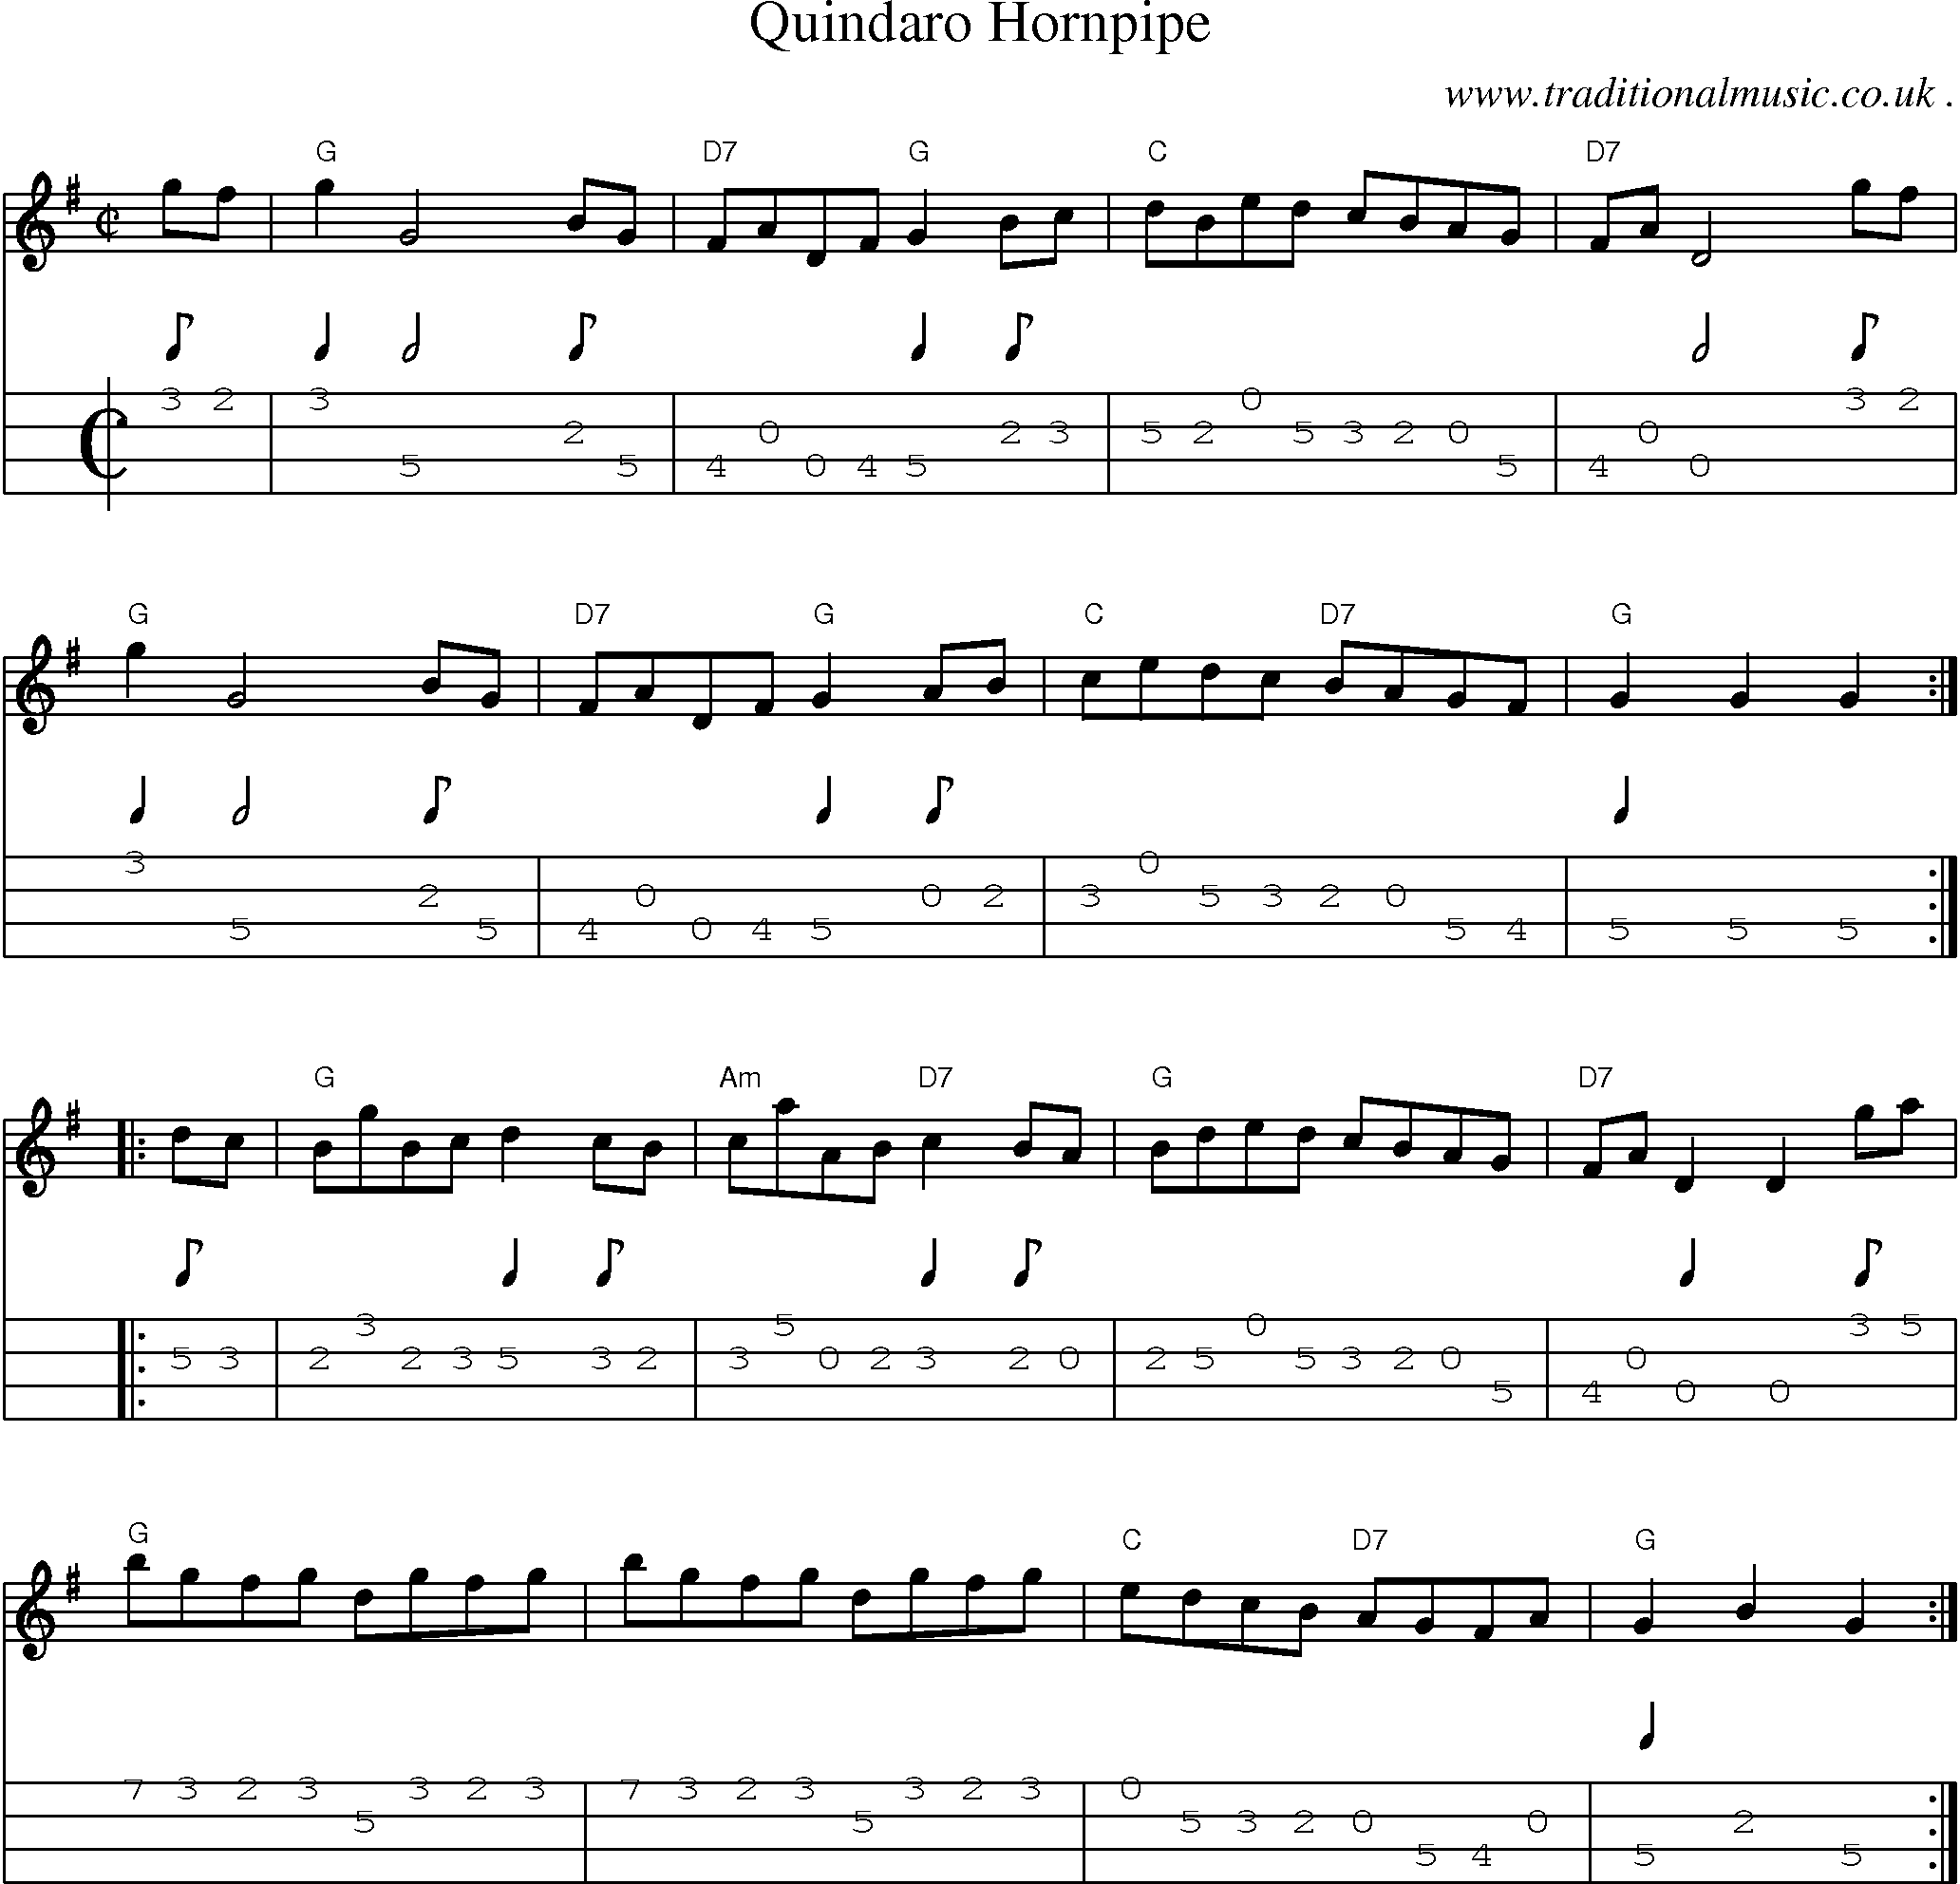 Music Score and Guitar Tabs for Quindaro Hornpipe